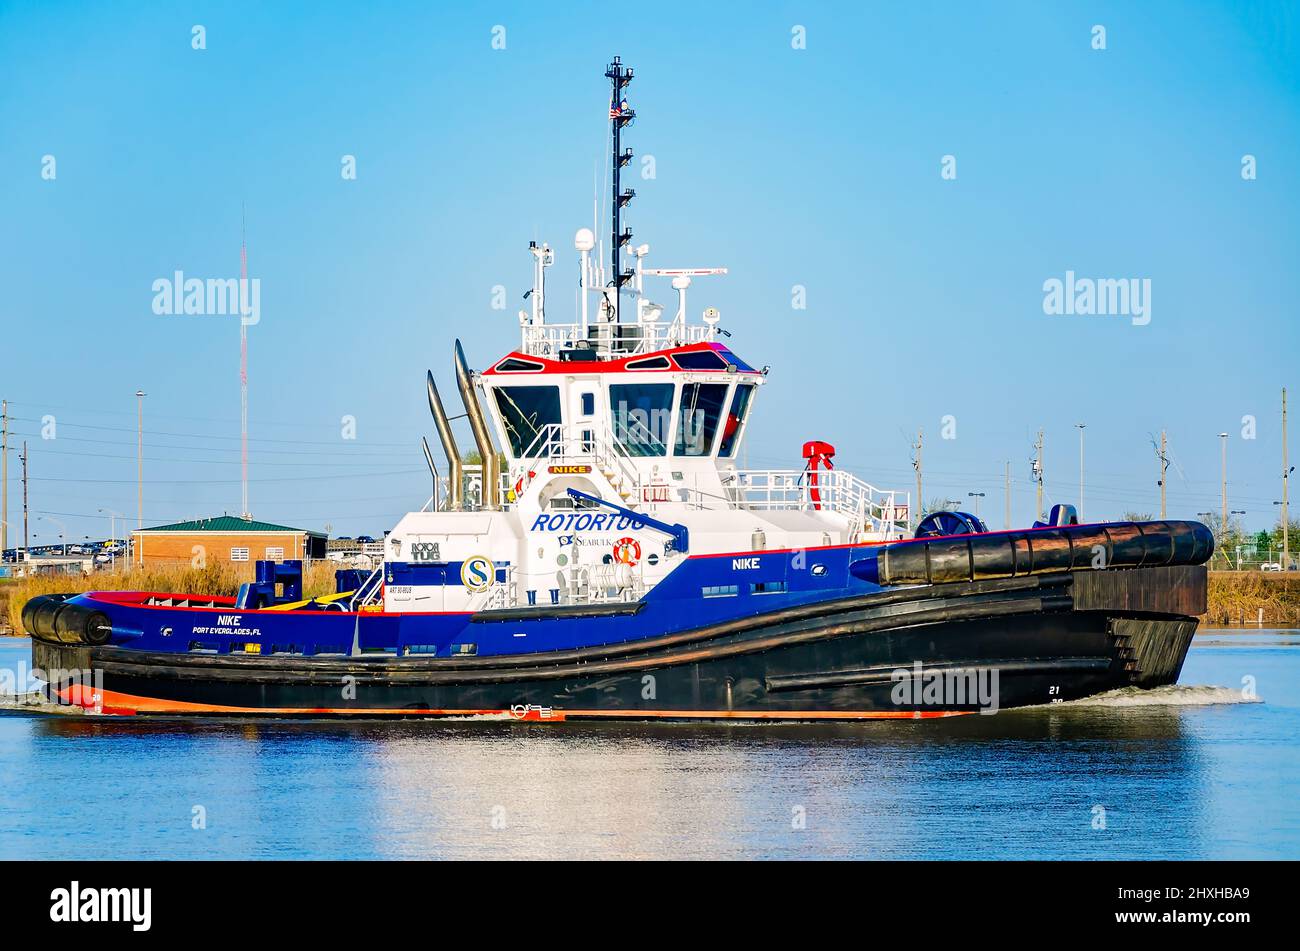 Nike, a Rotortug tugboat owned by Seabulk Towing, travels along the Mobile River near the Port of Mobile, March 10, 2022, in Mobile, Alabama. Stock Photo